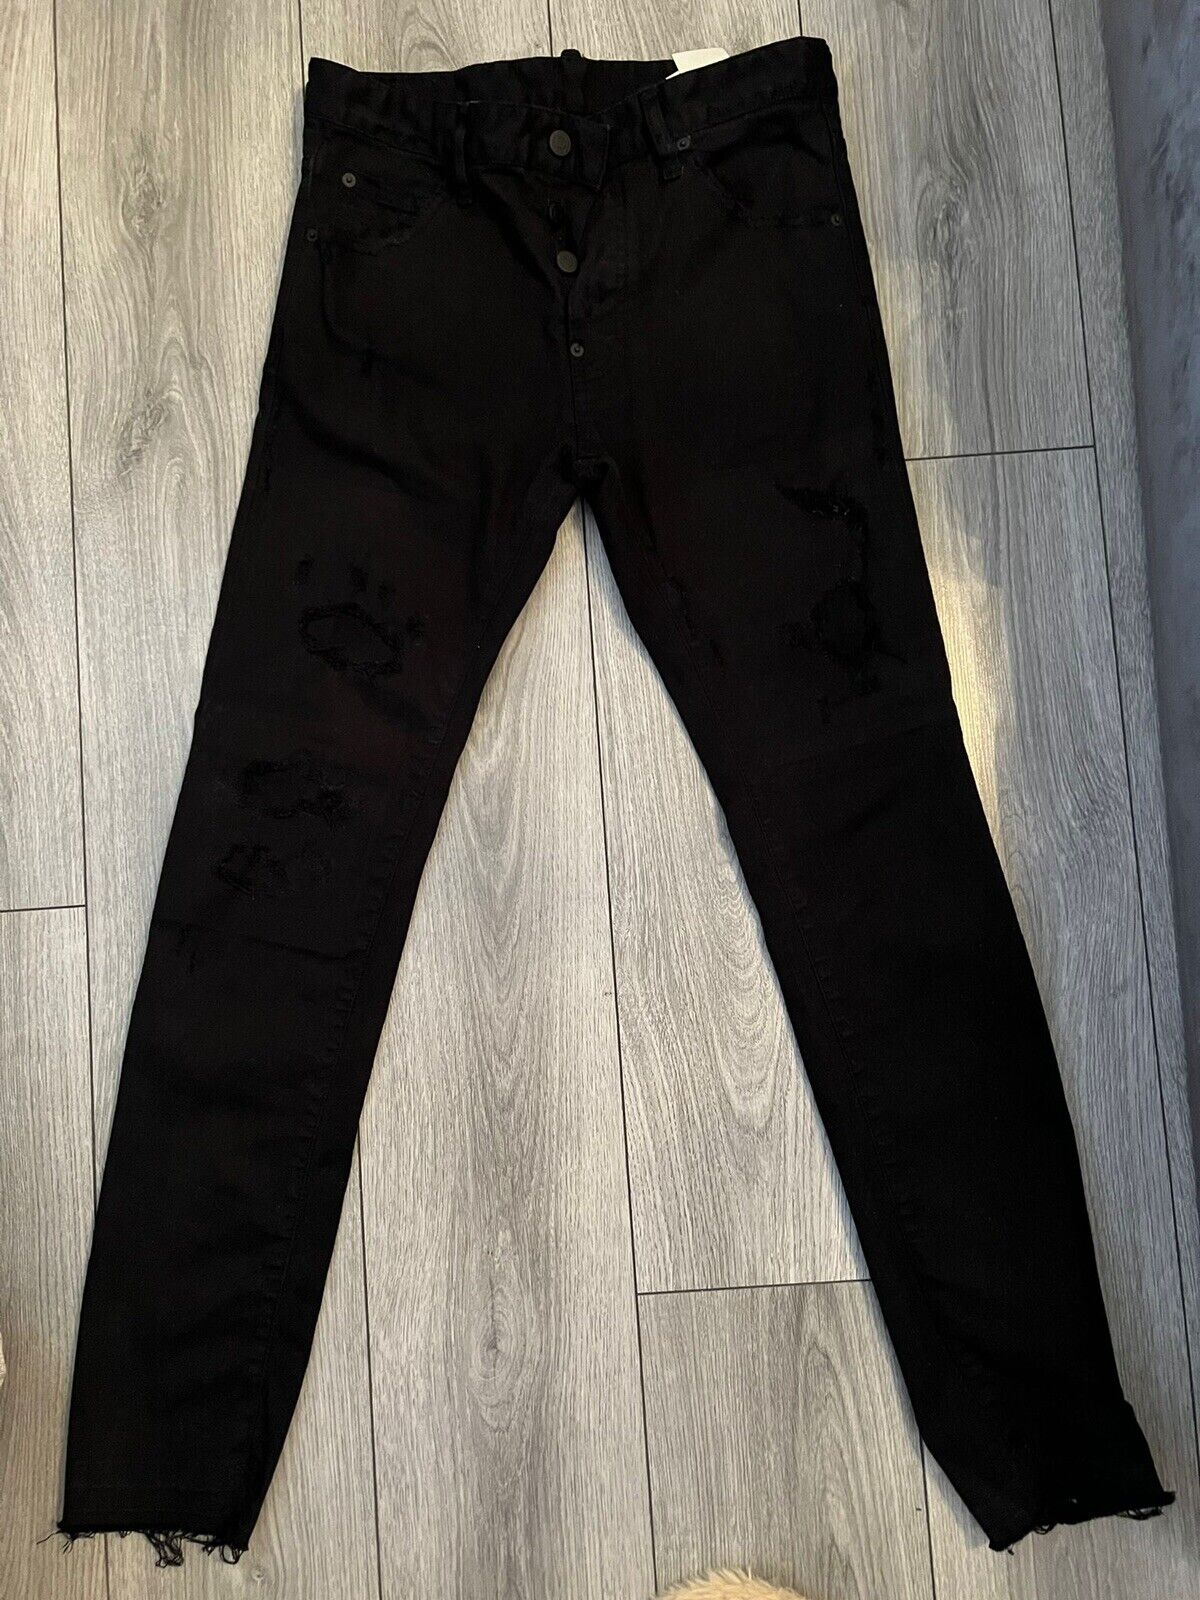 Men’s Dsquared Cool Guy jeans 46